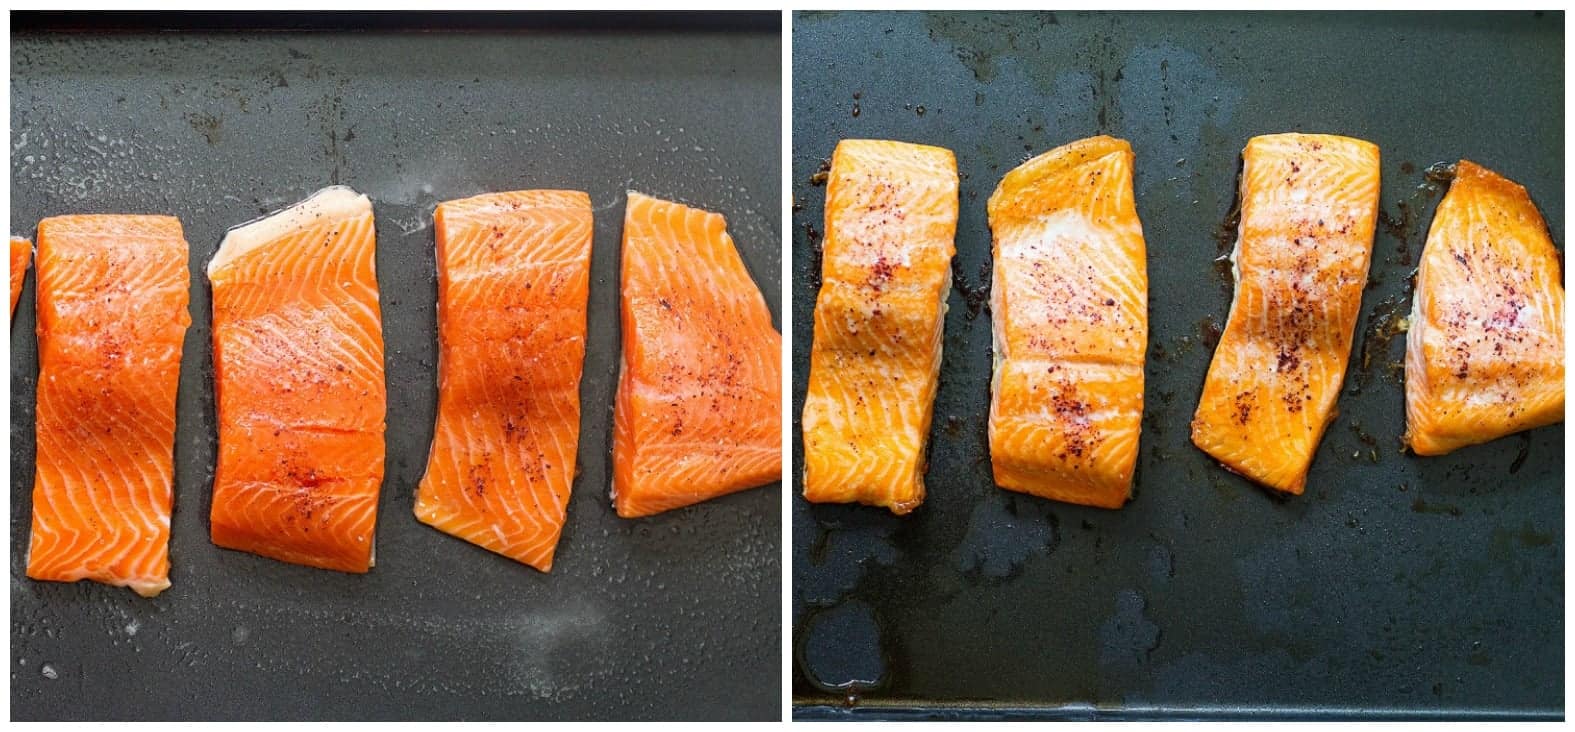 To make salmon patties, bake the salmon in the oven for 20 minutes. 